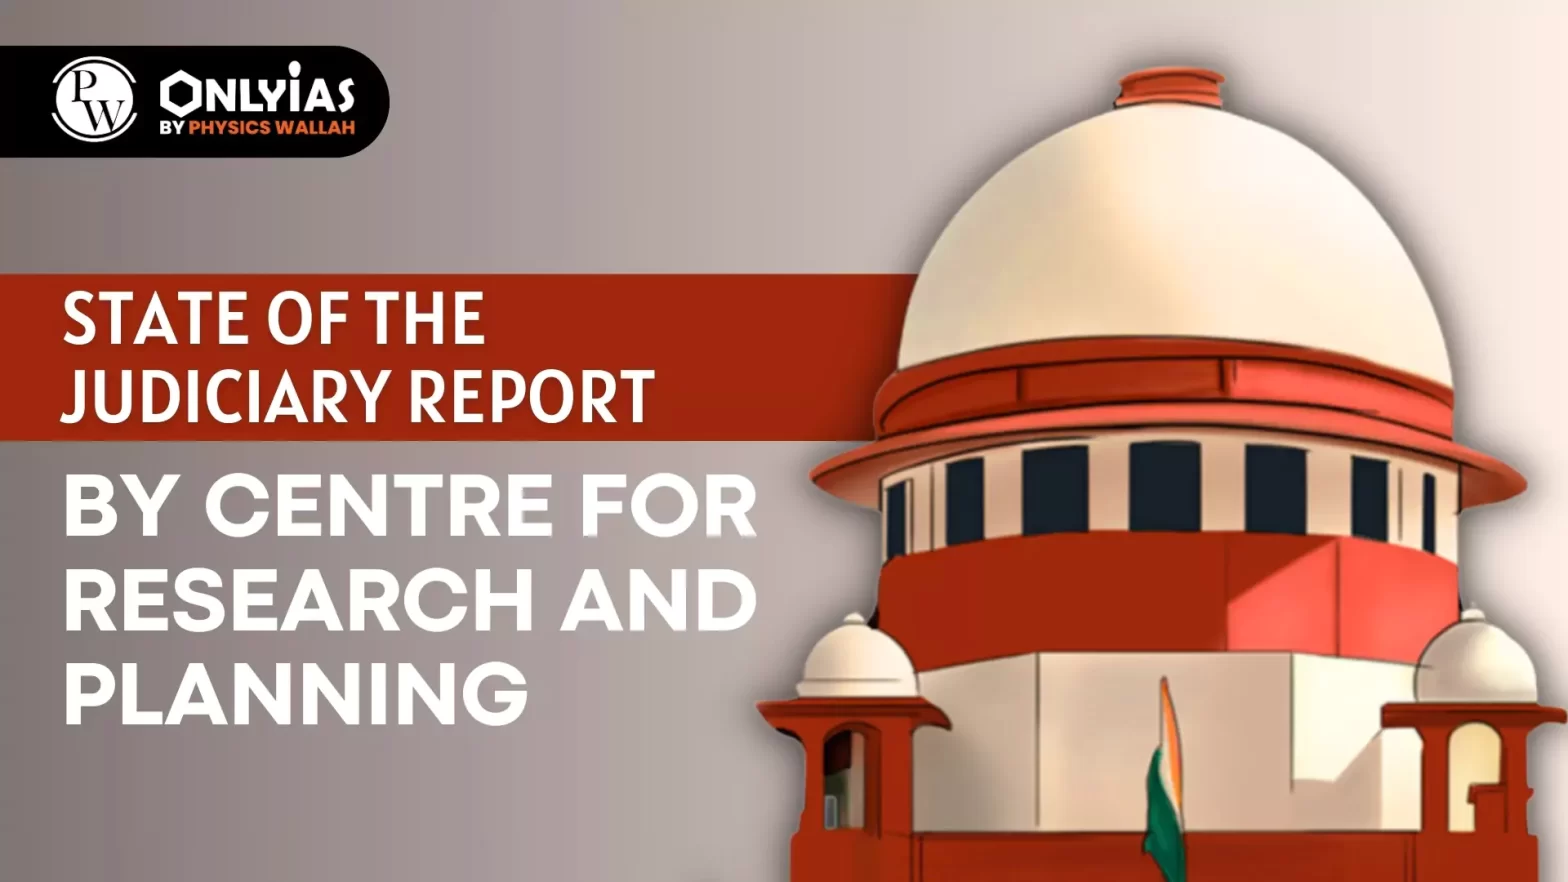 State of the Judiciary Report by Centre for Research and Planning